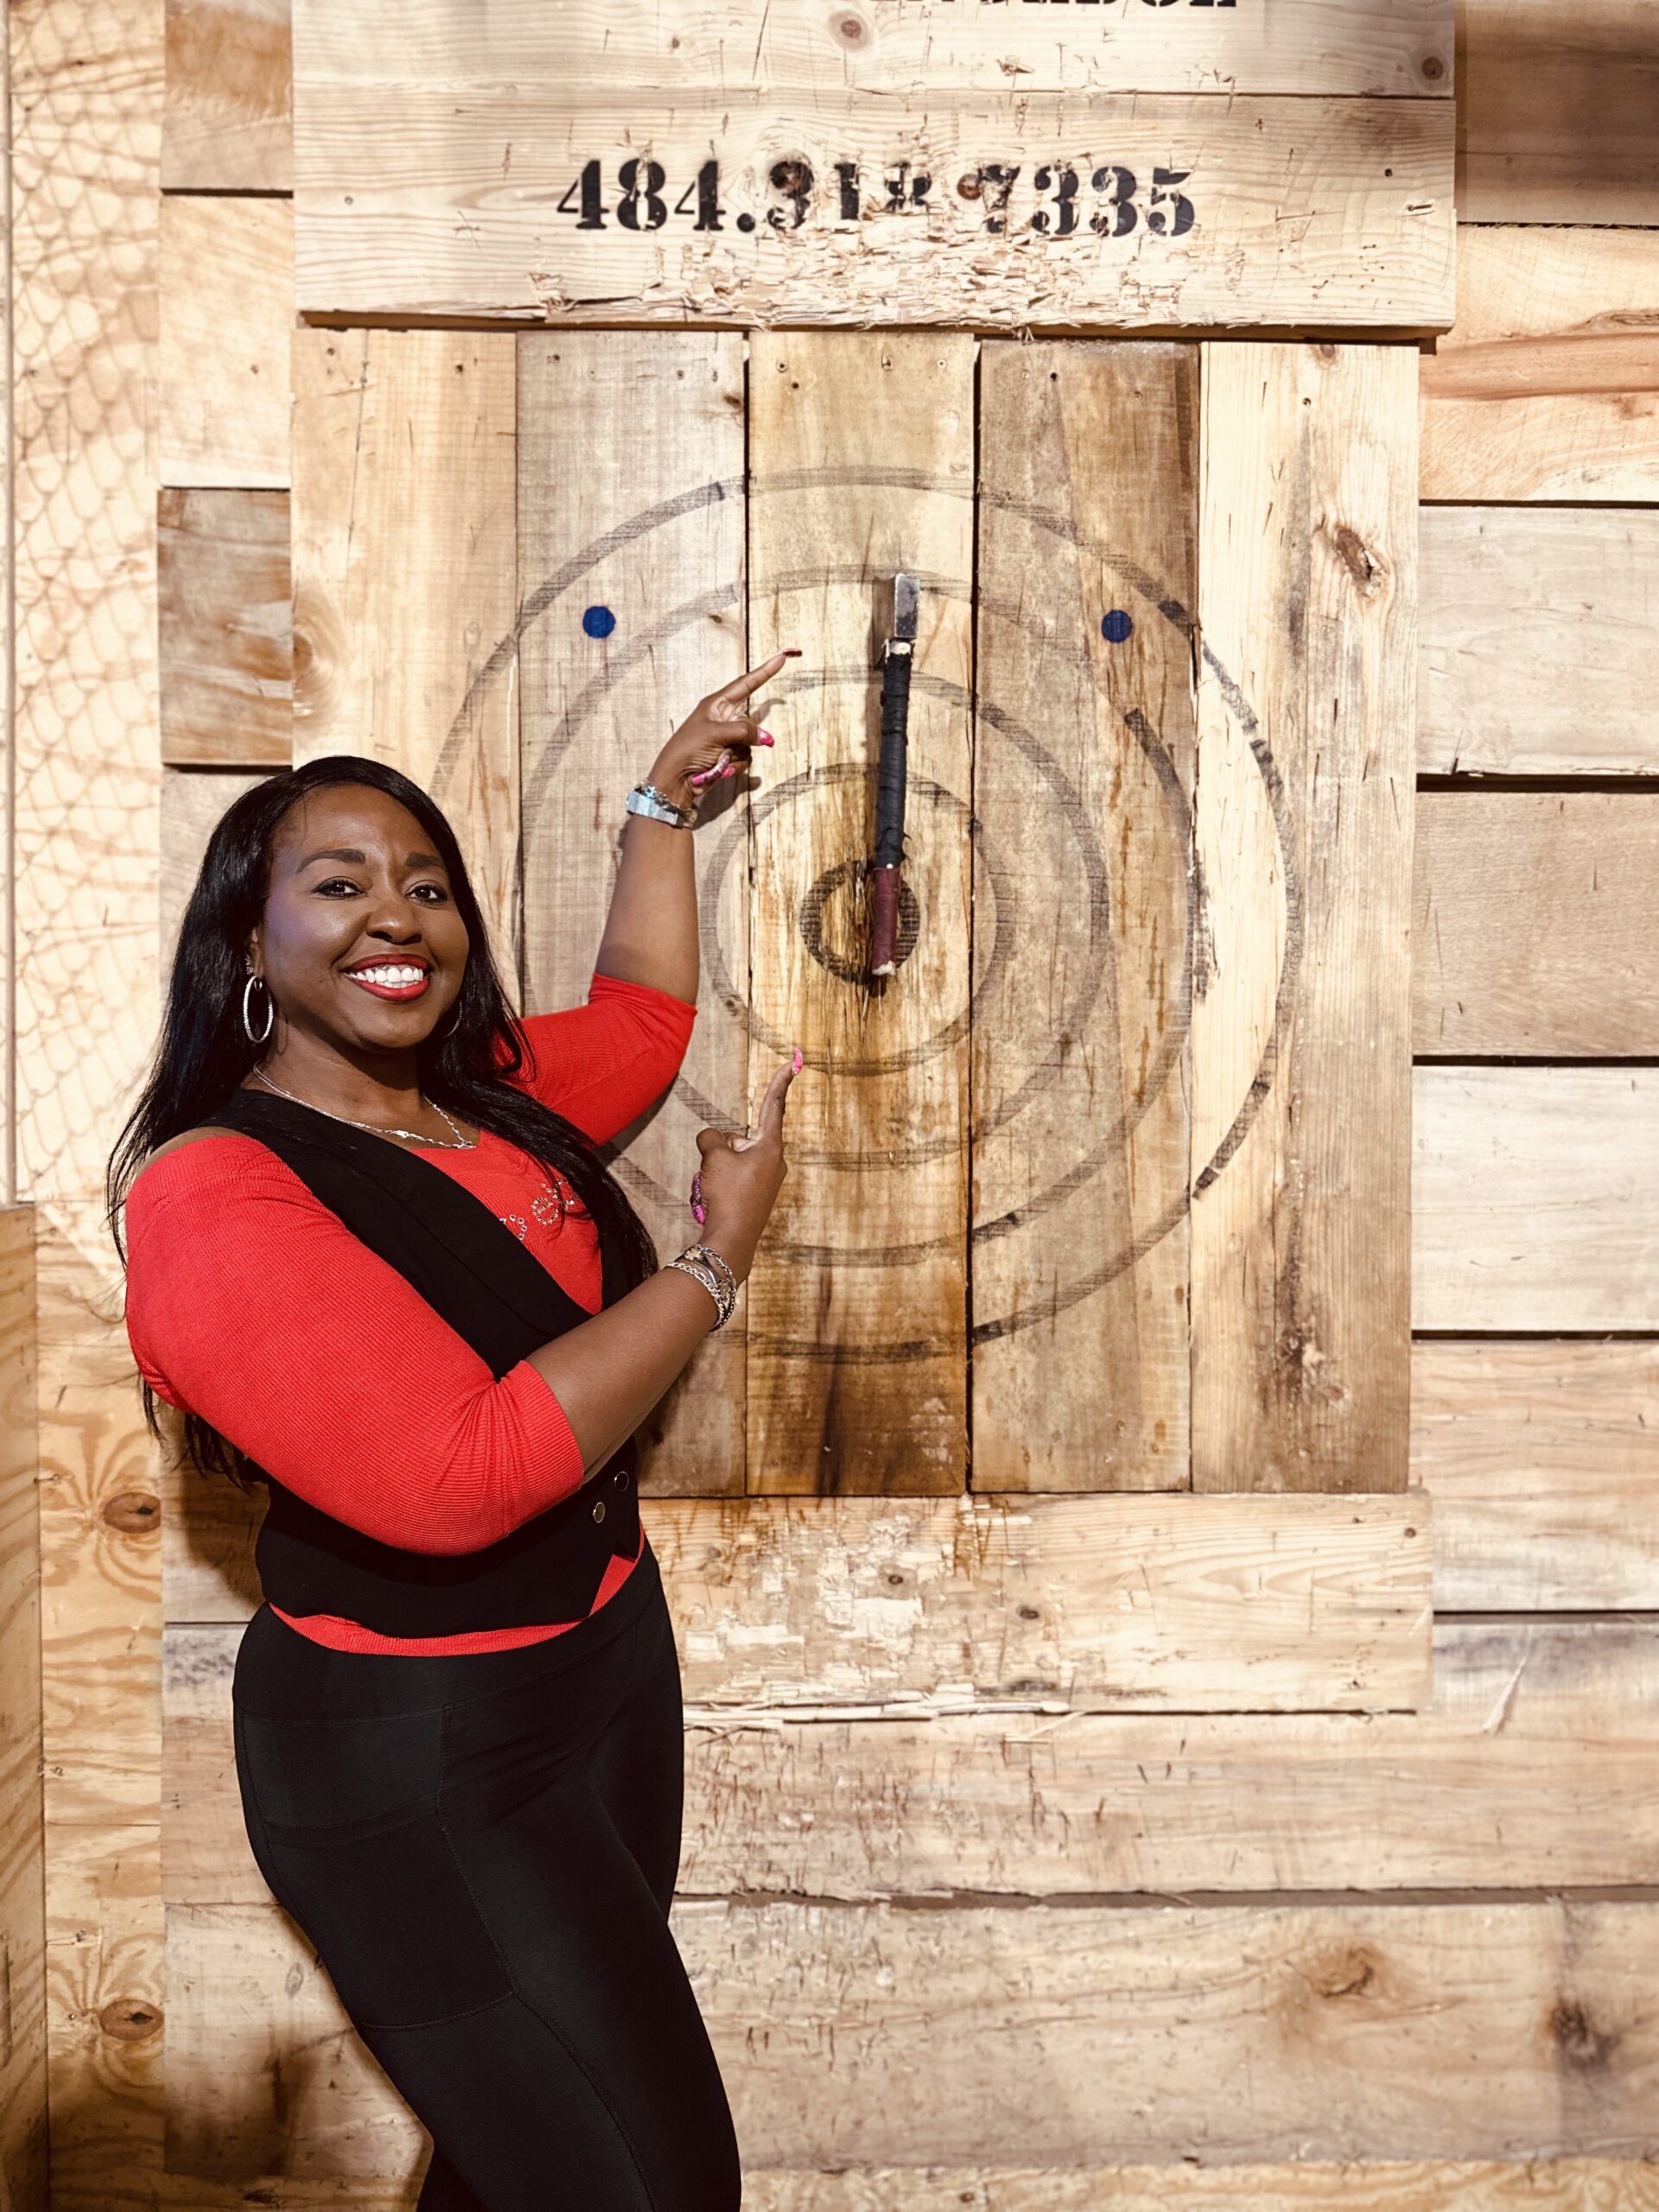 Axe Throwing Lessons and Training in Malvern PA